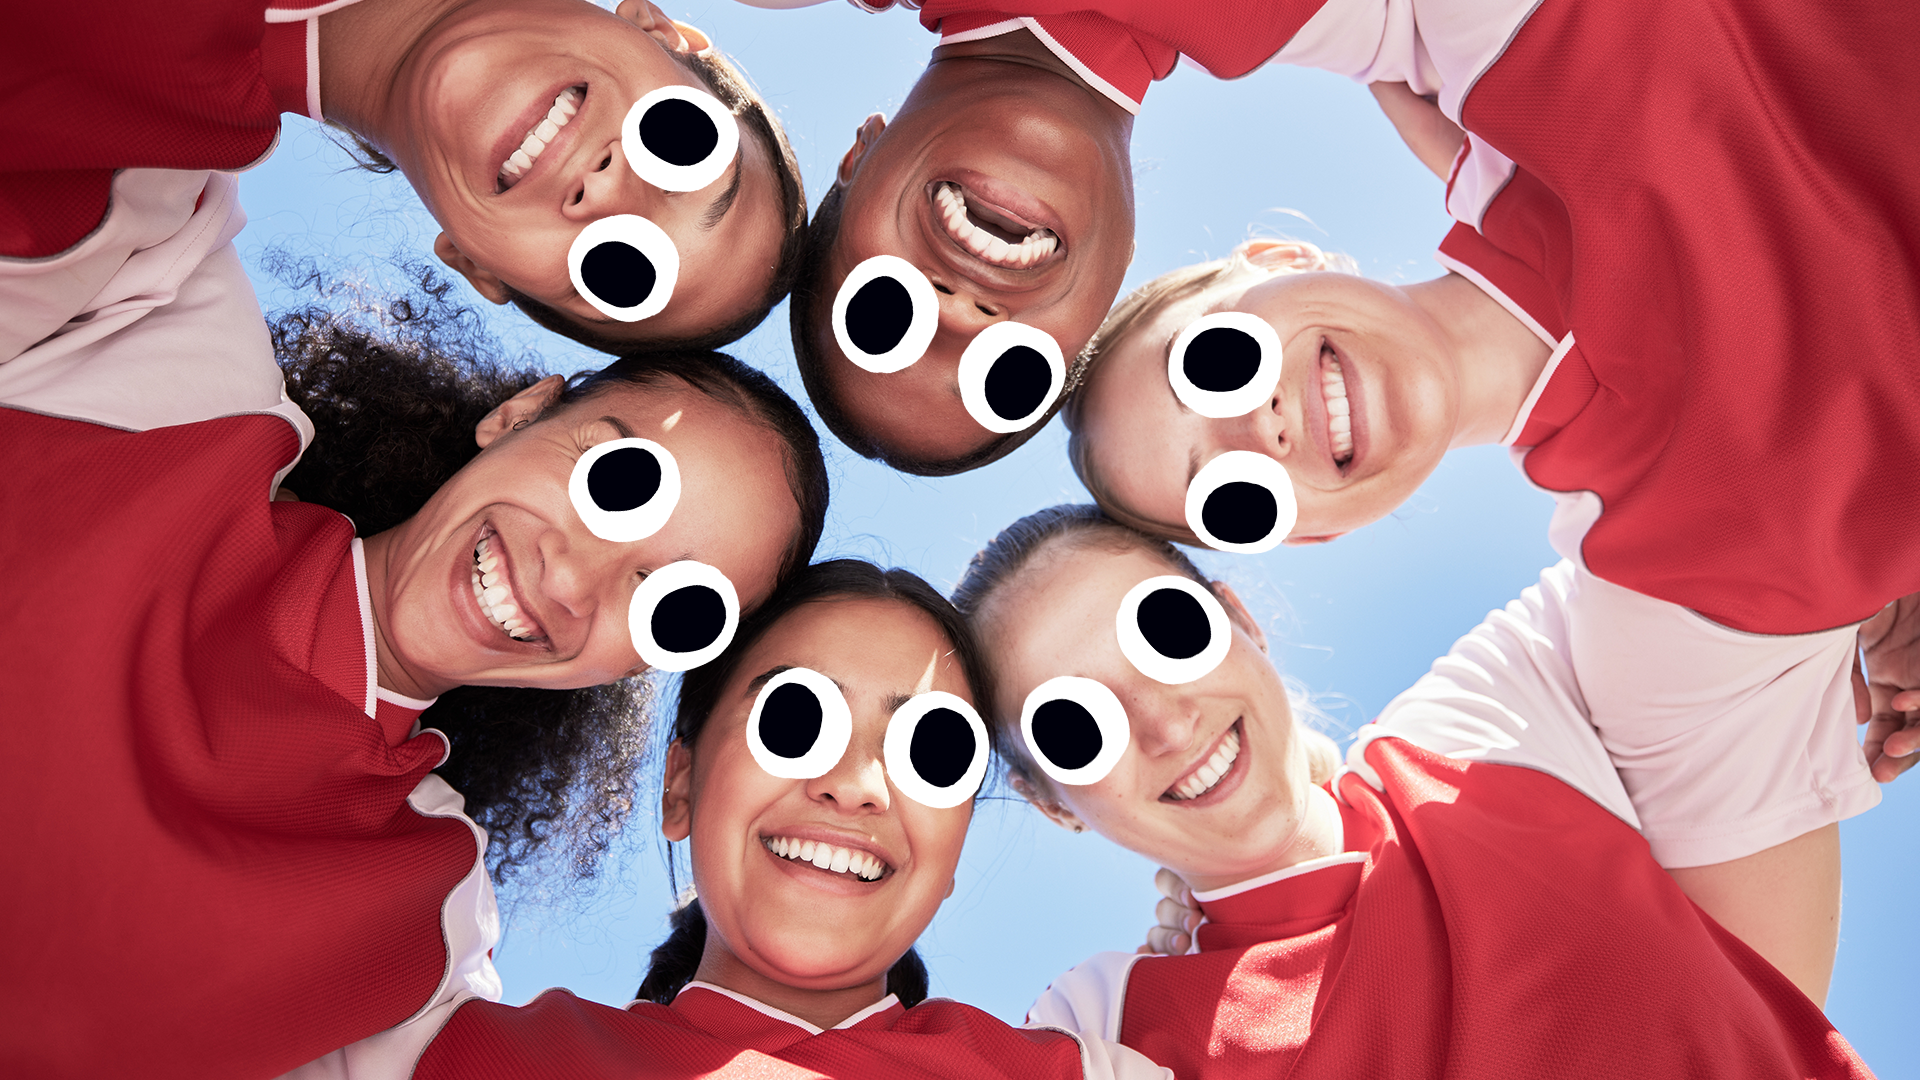 Female football team with heads together